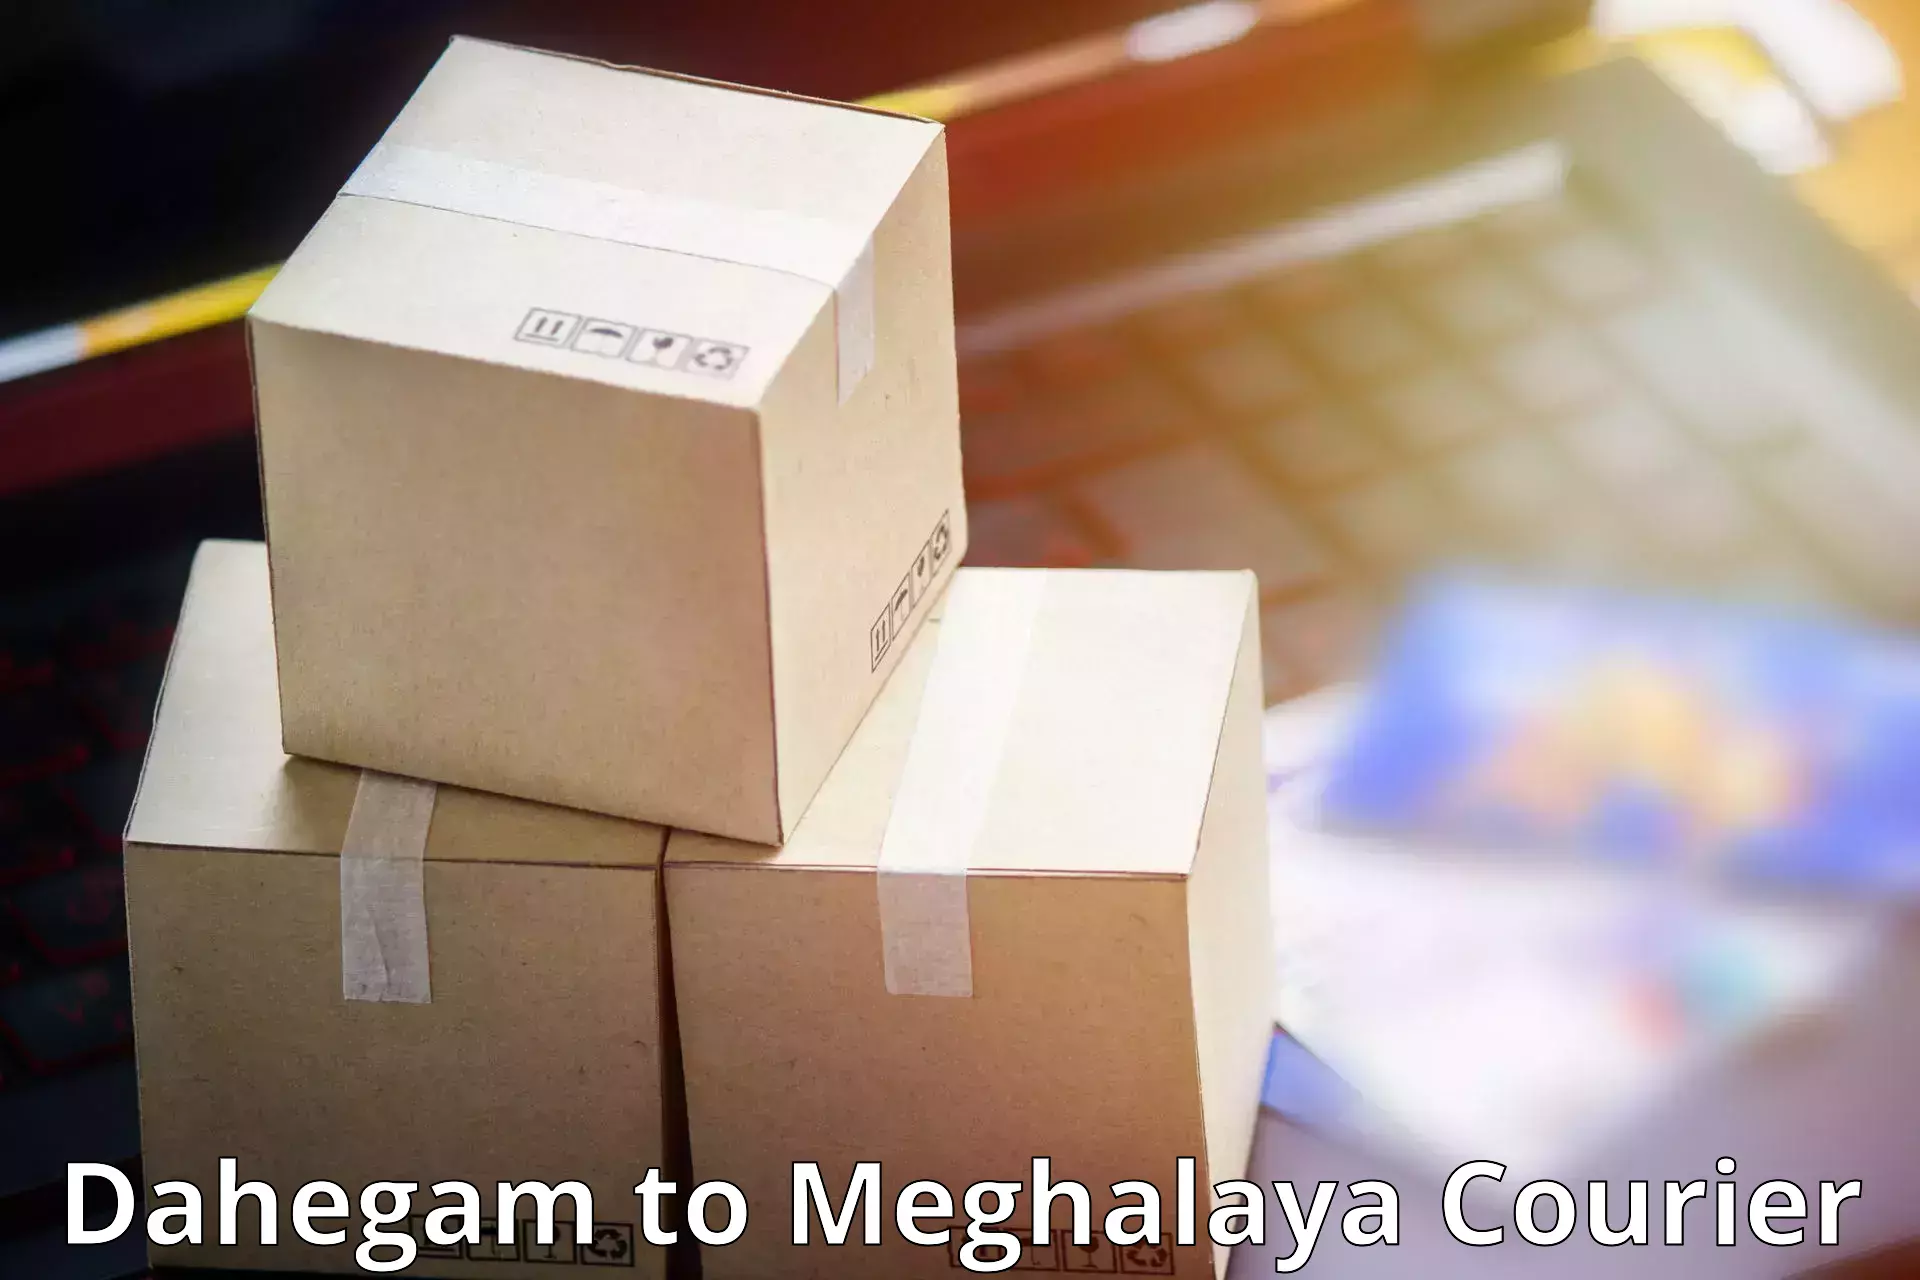 Business delivery service Dahegam to Shillong